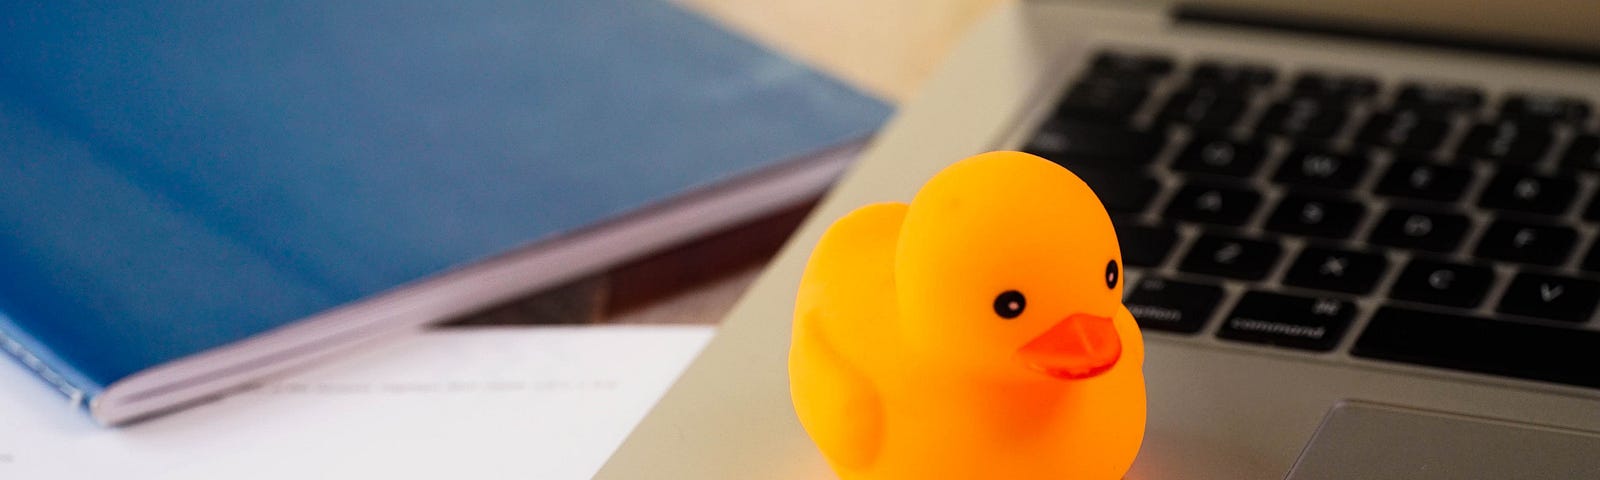 A rubber duck on a laptop